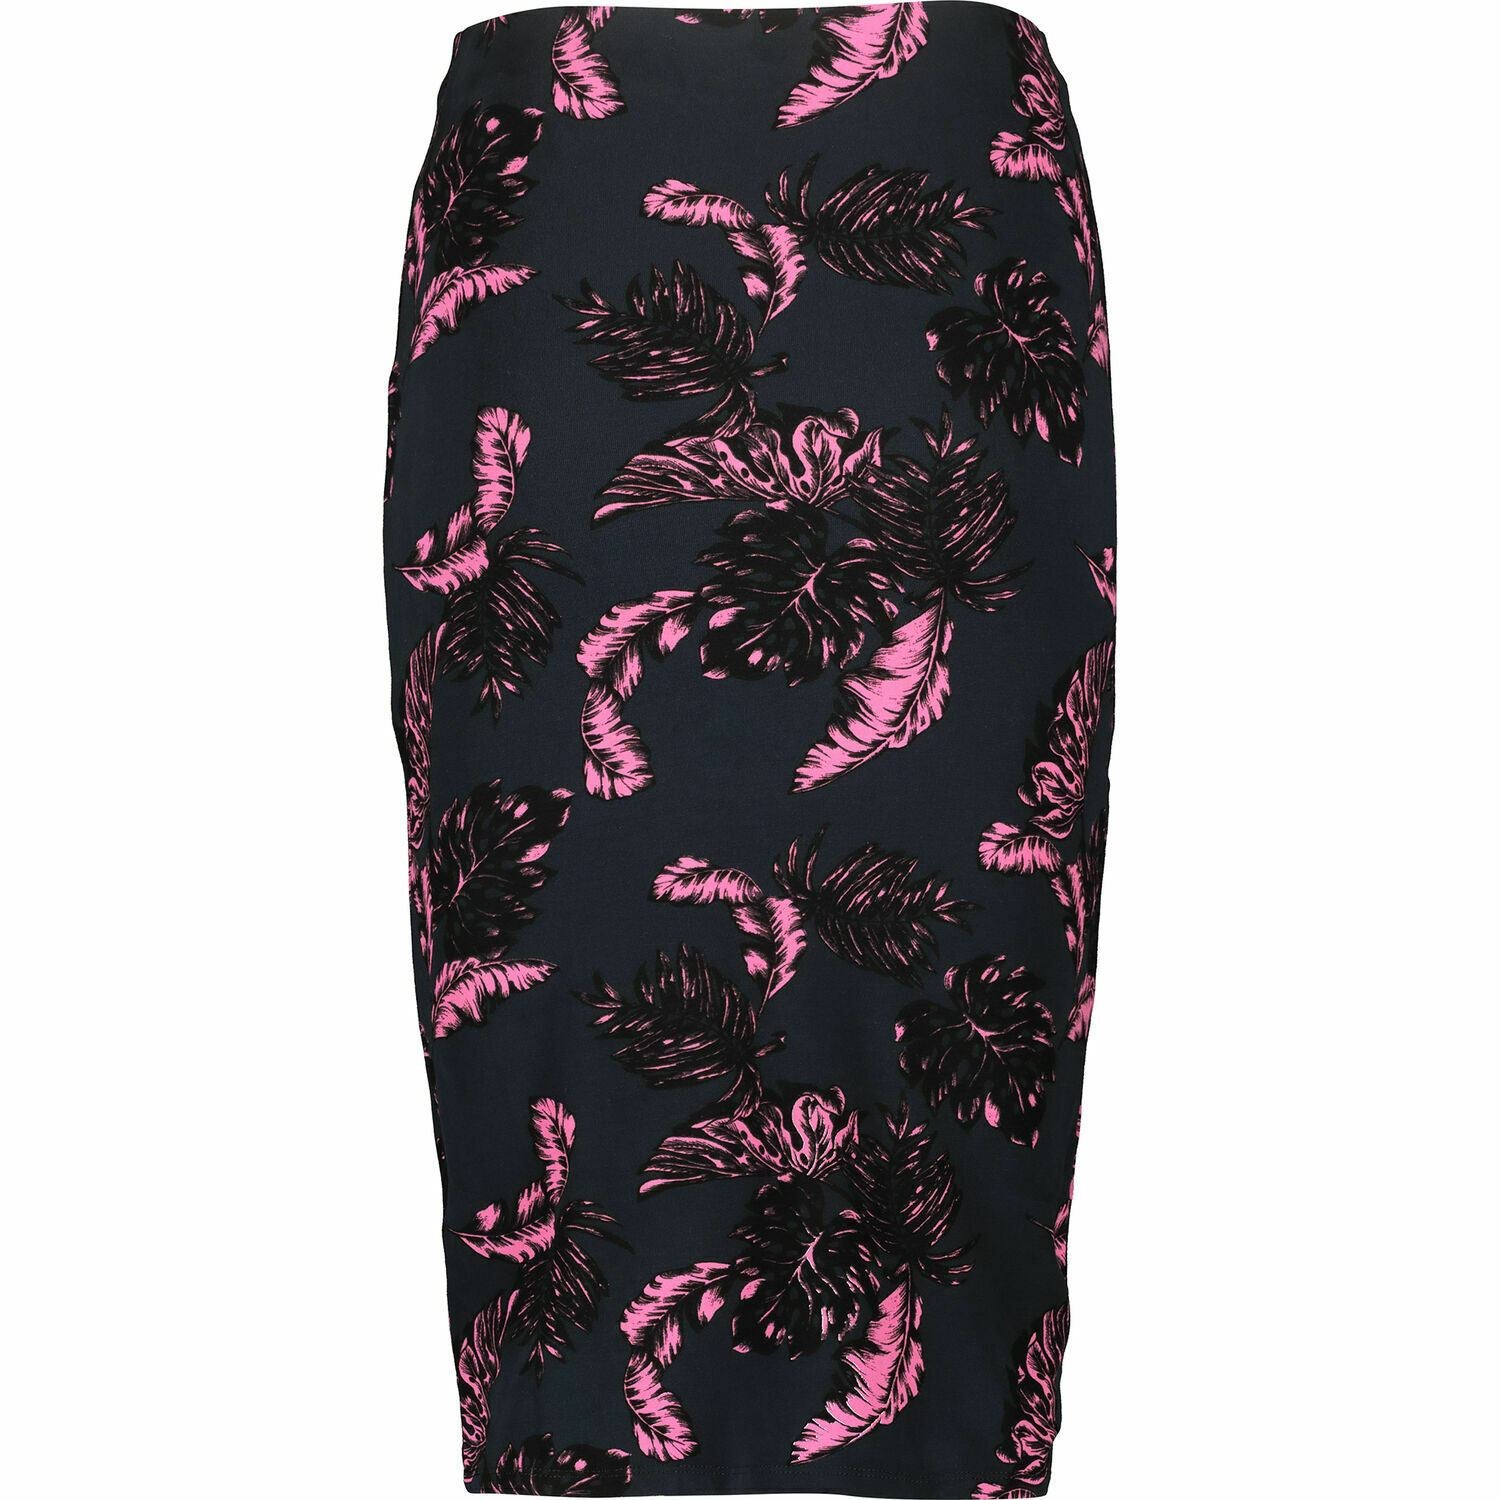 SUPERDRY Women's Beach Leaf Pencil Skirt, Tropical Navy / Pink, size S - UK 10